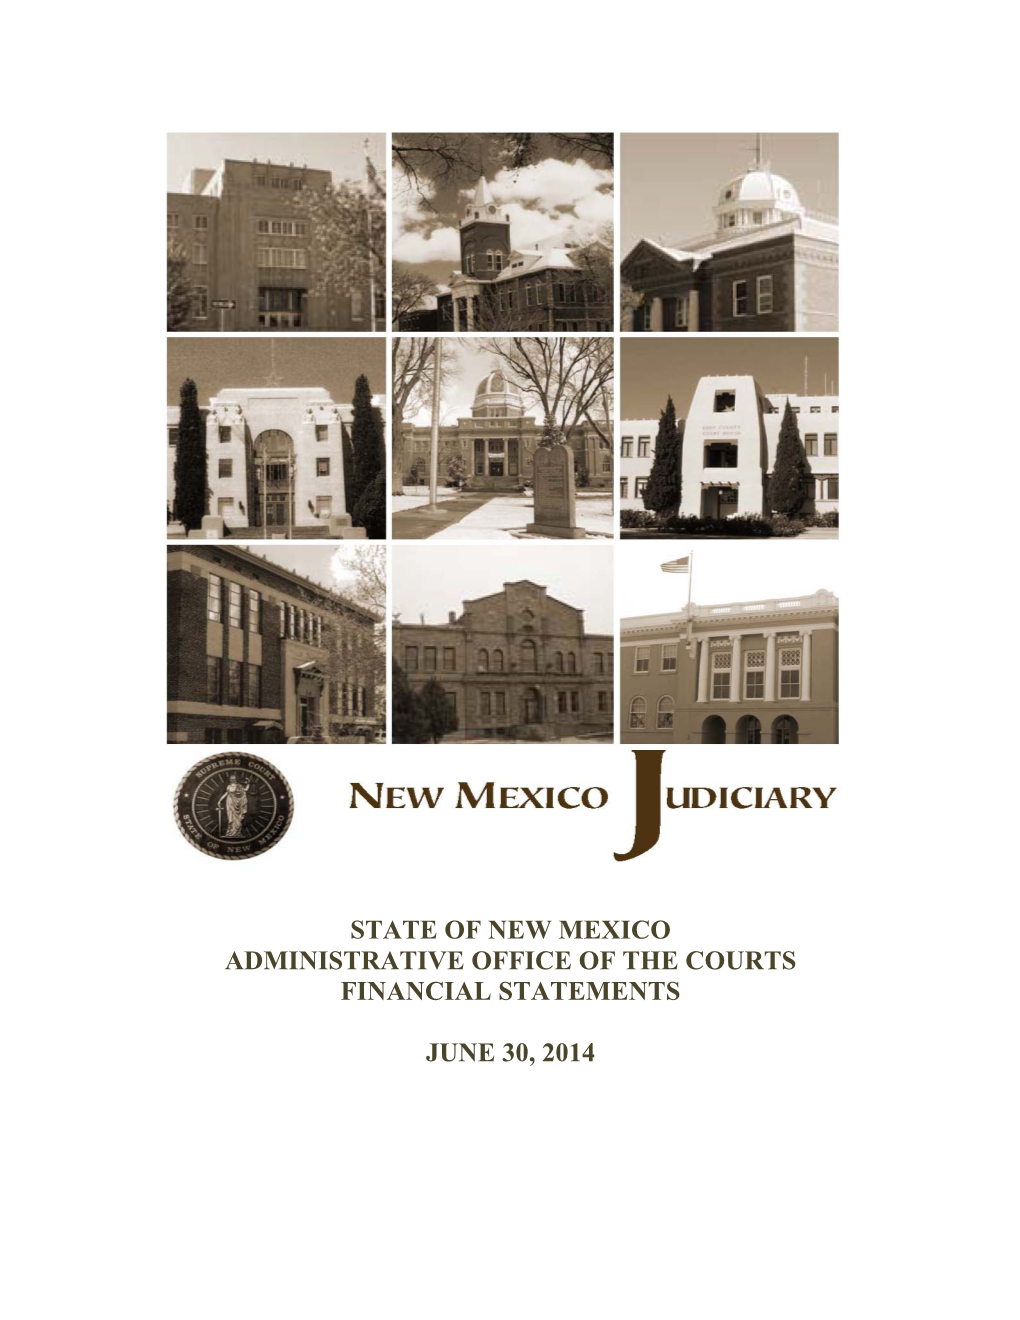 State of New Mexico Administrative Office of the Courts Financial Statements June 30, 2014